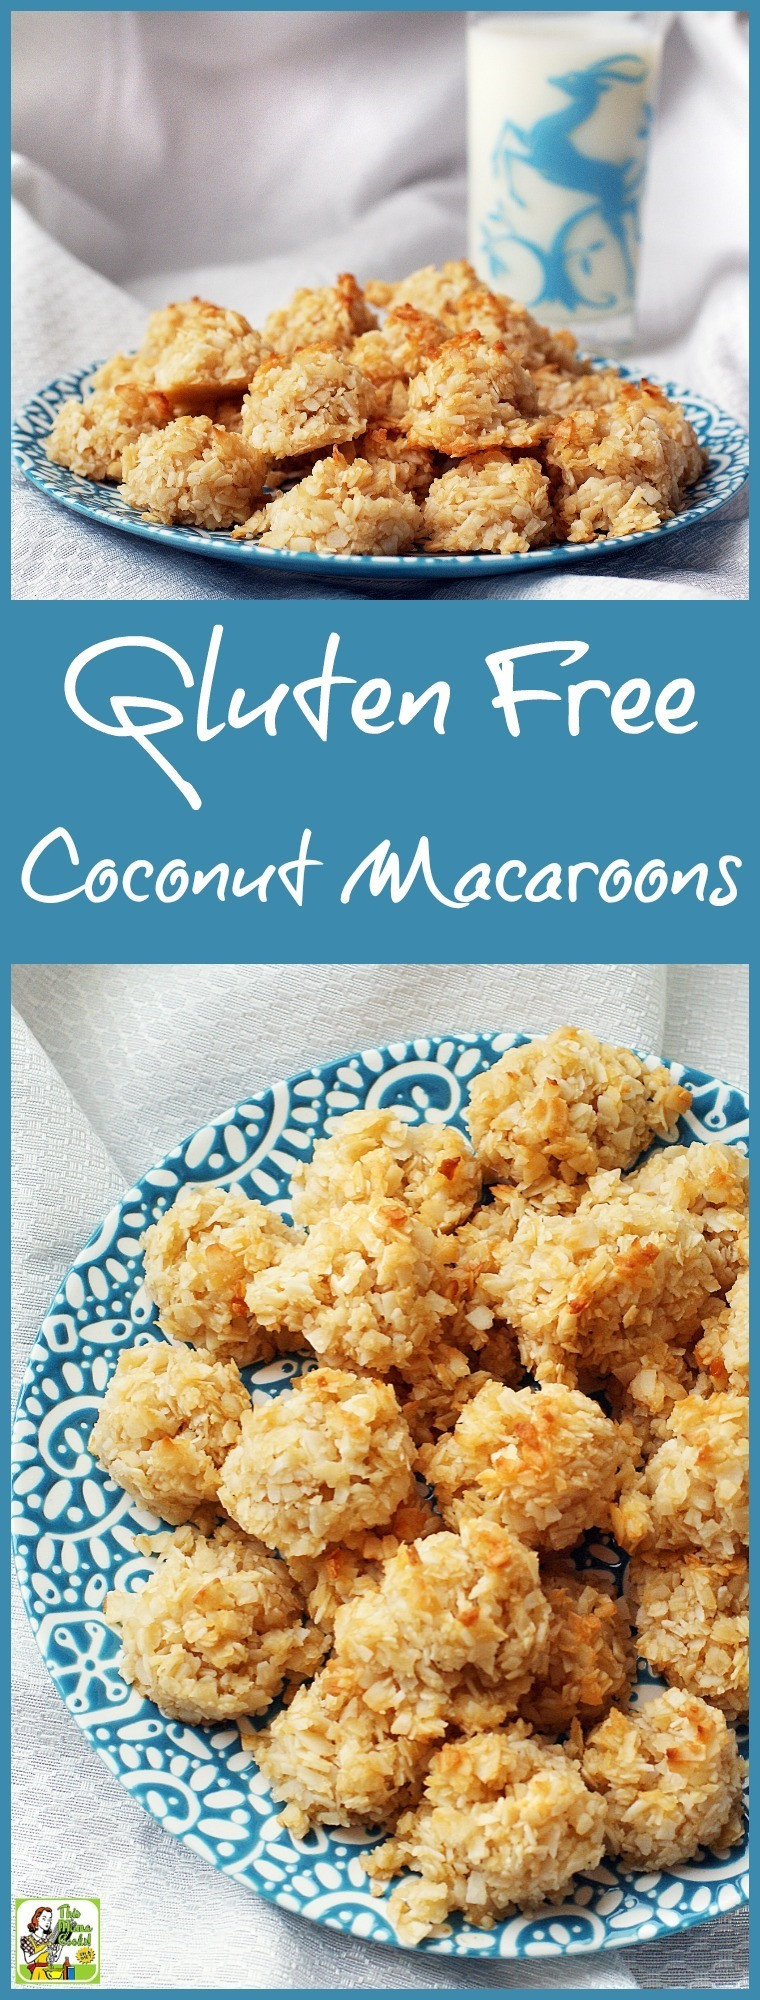 Are Coconut Macaroons Gluten Free
 Gluten Free Coconut Macaroons